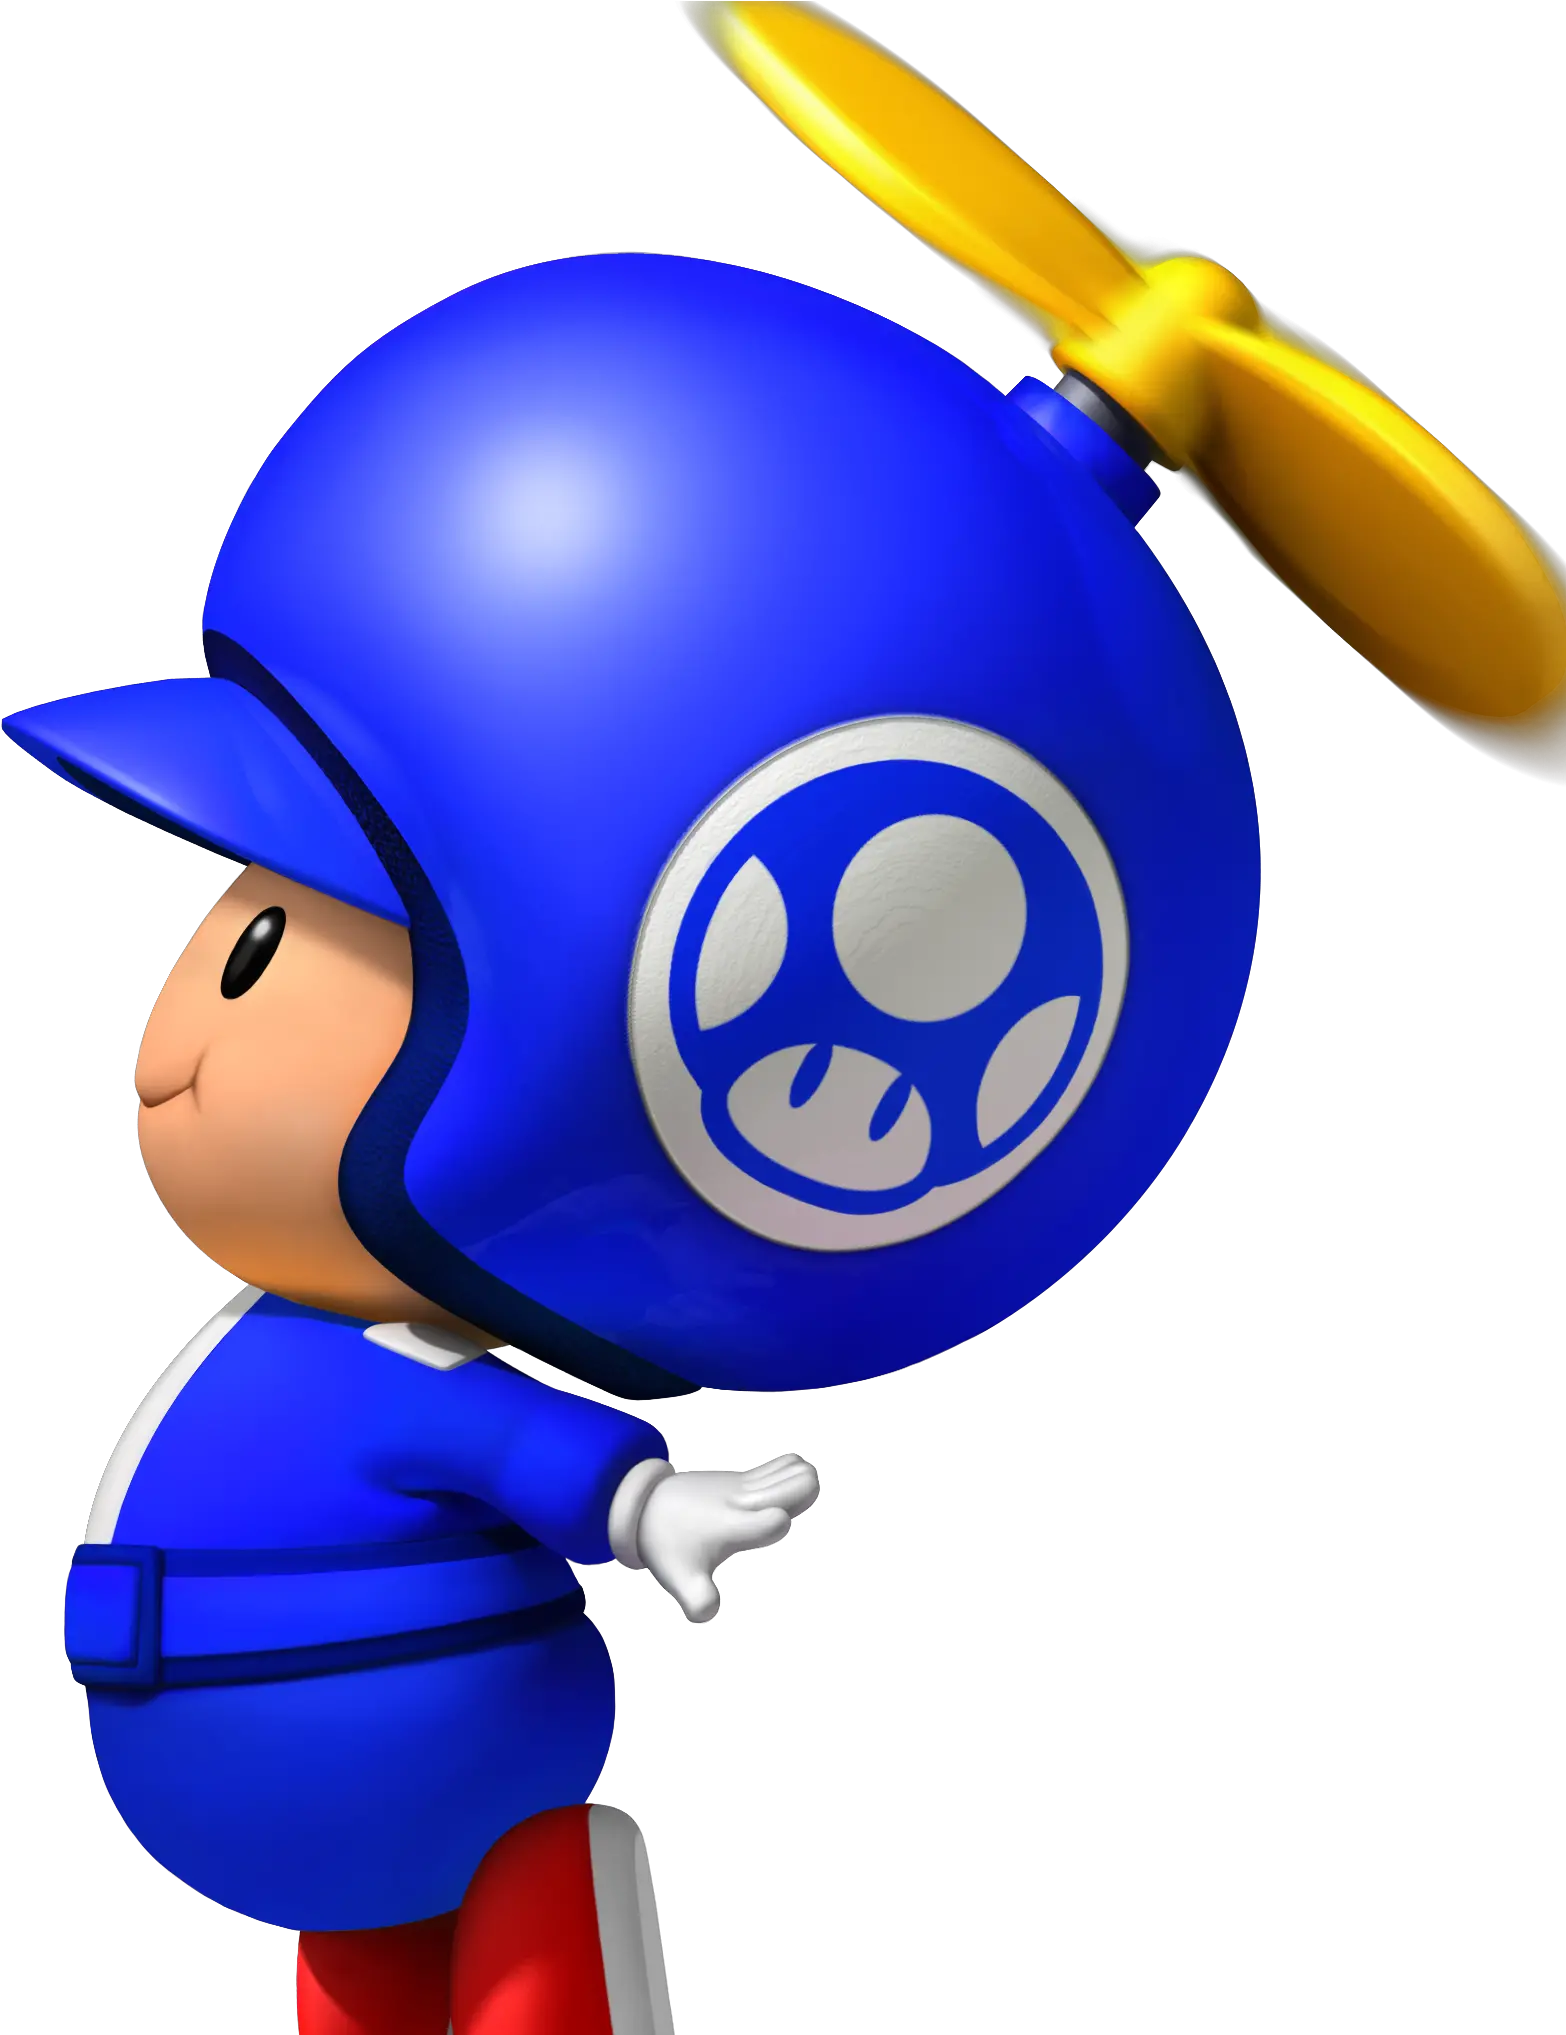 Download Propeller Blue Toad Png Image Cartoon Toad Png